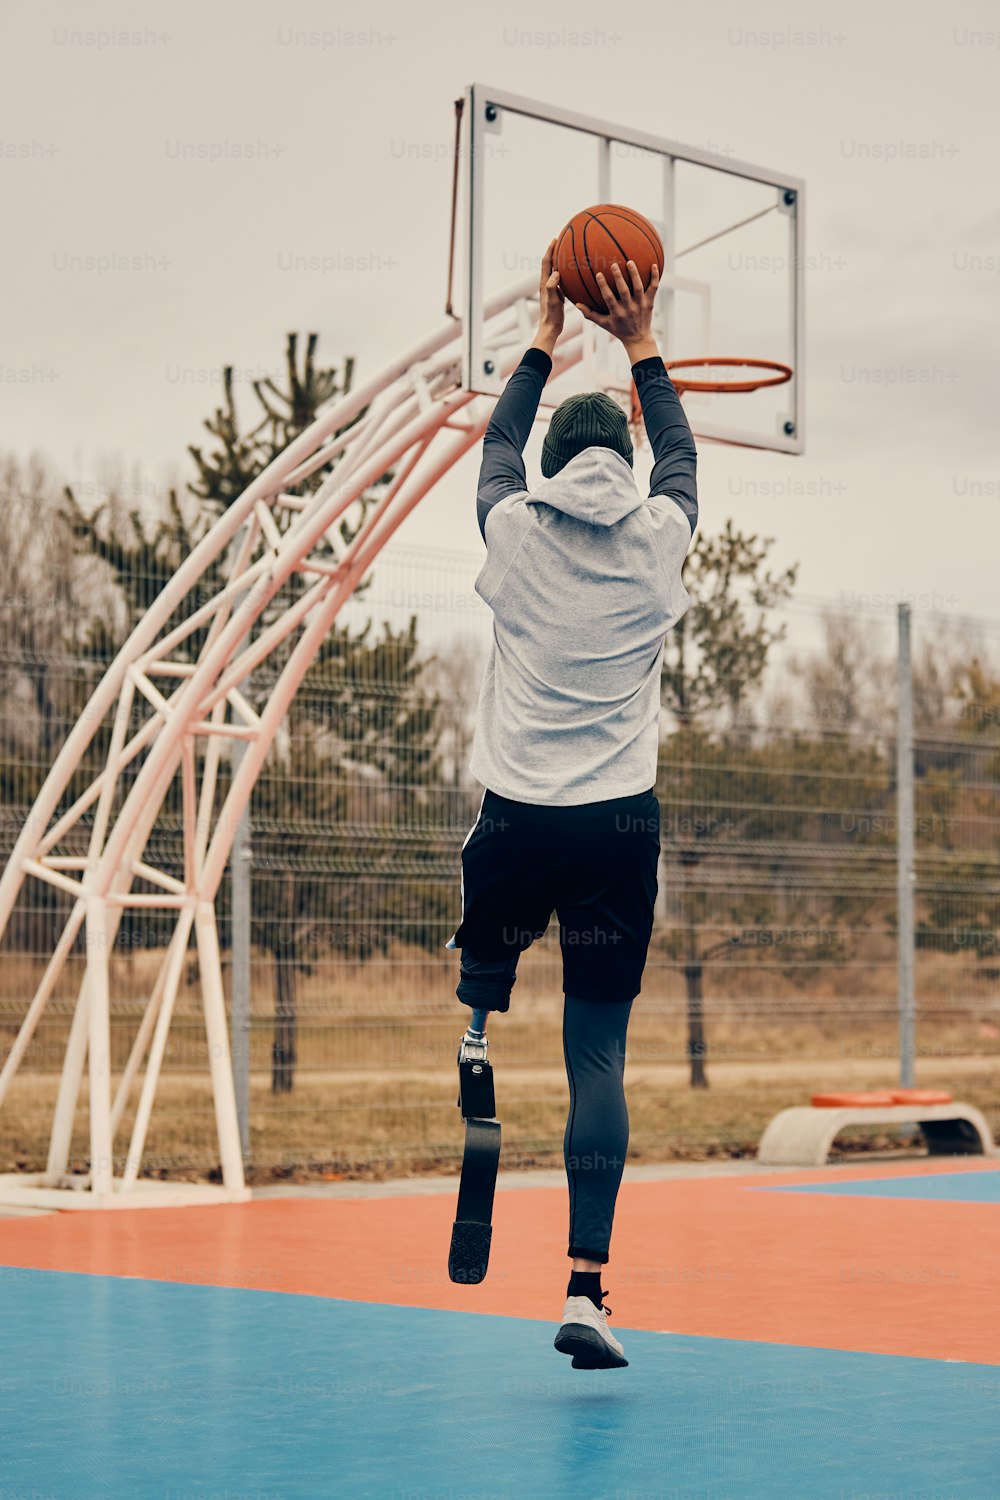 Back view athletic man with artificial leg shooting at the hoop while playing basketball on outdoor court.